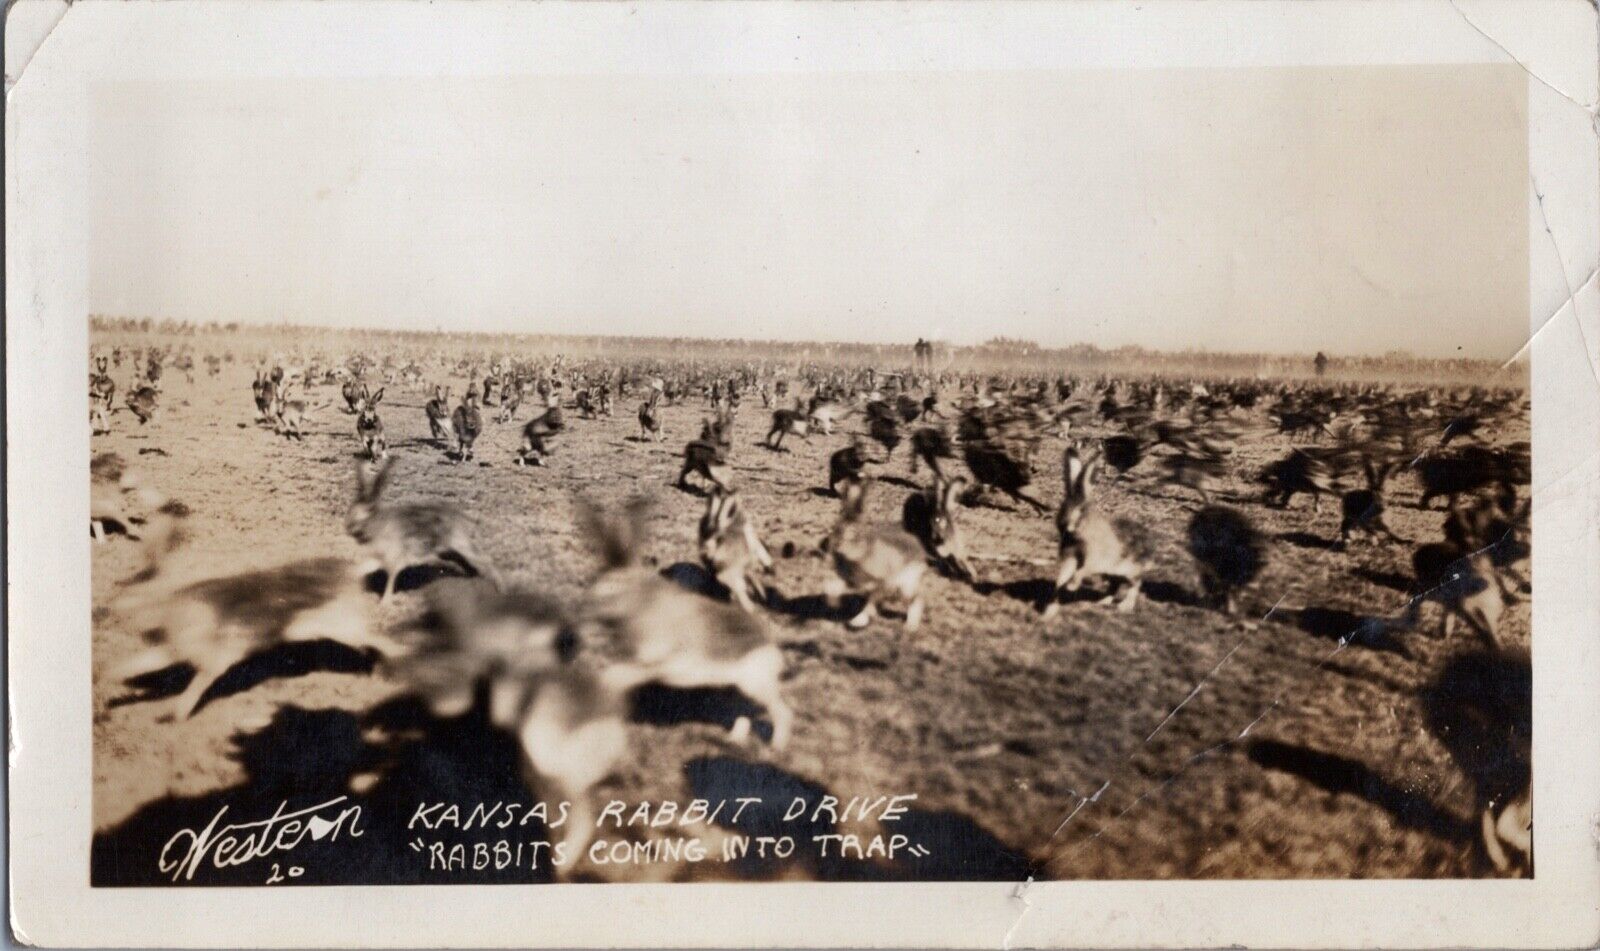 c1930\'s Rabbit Drive Rabbits Going Into Traps Old Photo